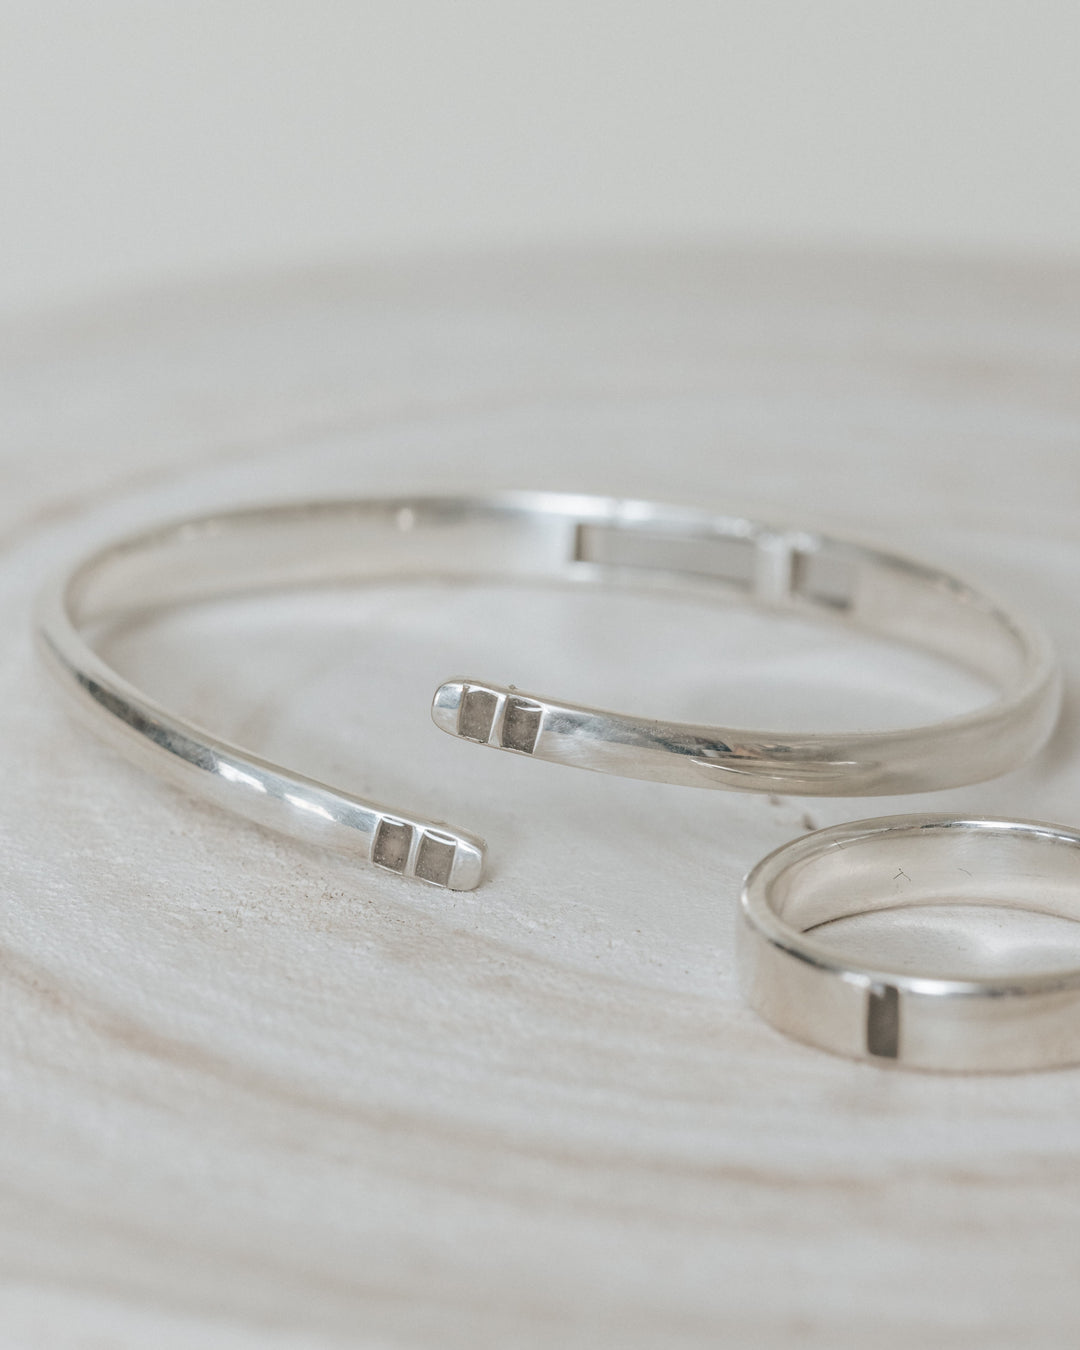 An image of the ashes settings in a silver memorial ring and bracelet set